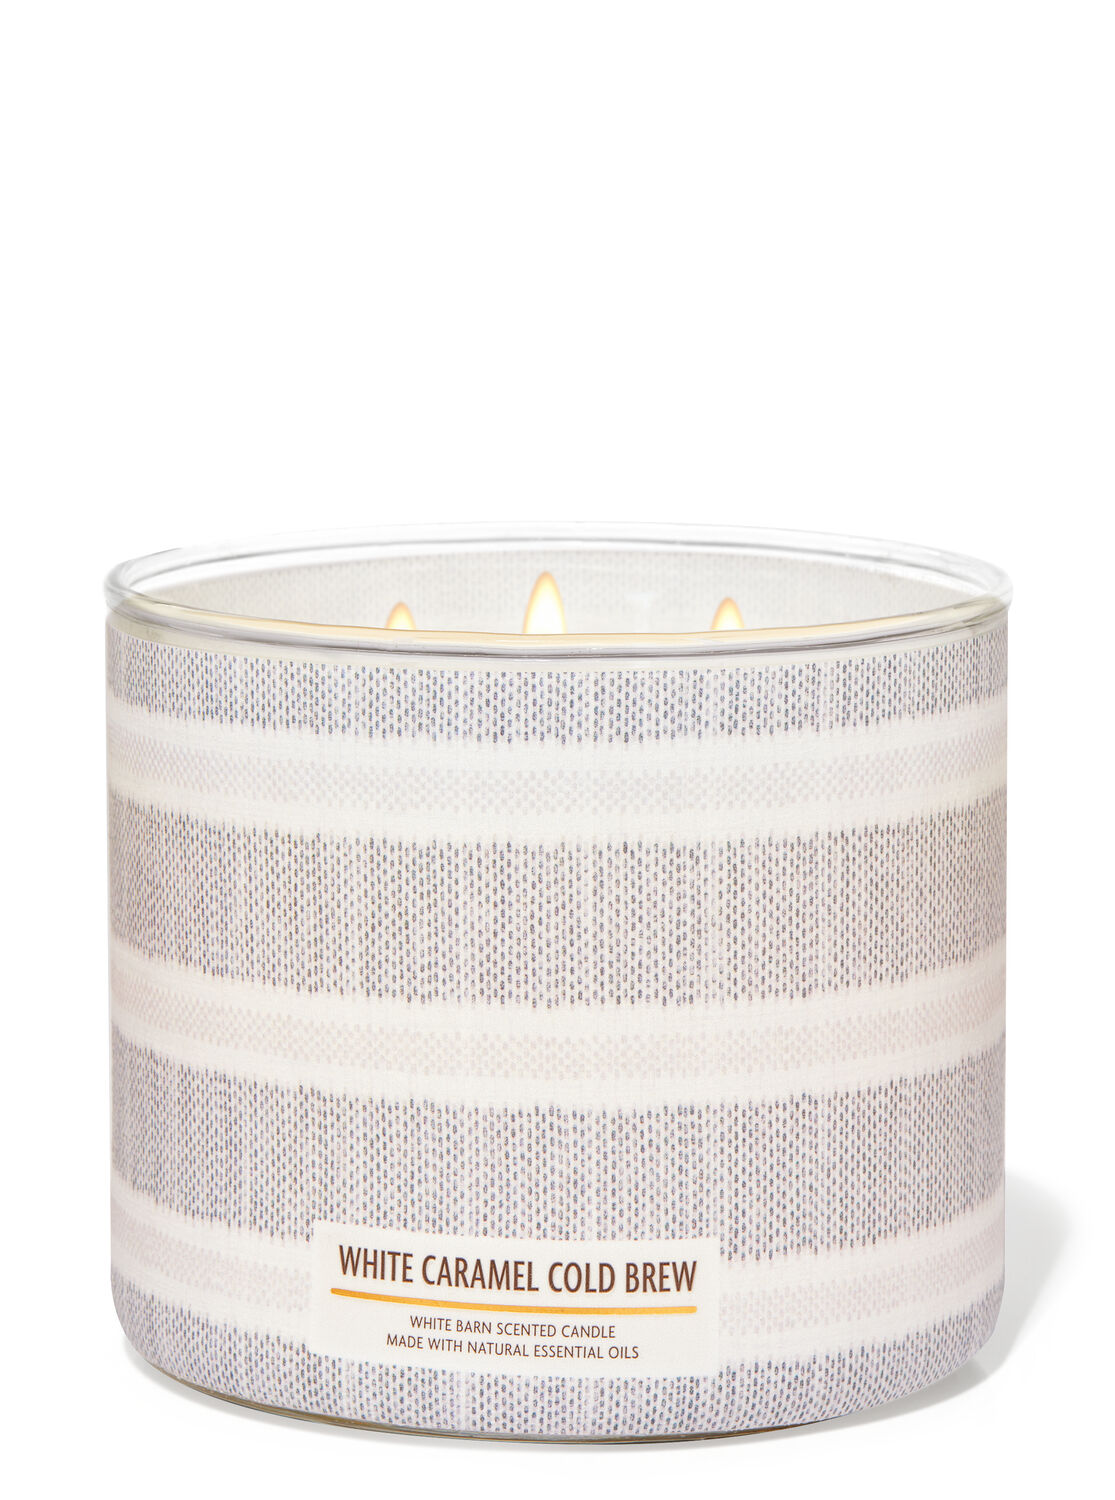 Bath & Body Works WHITE CARAMEL COLD BREW Candle SCENTED 3-Wick 14.5 oz Pick 1 